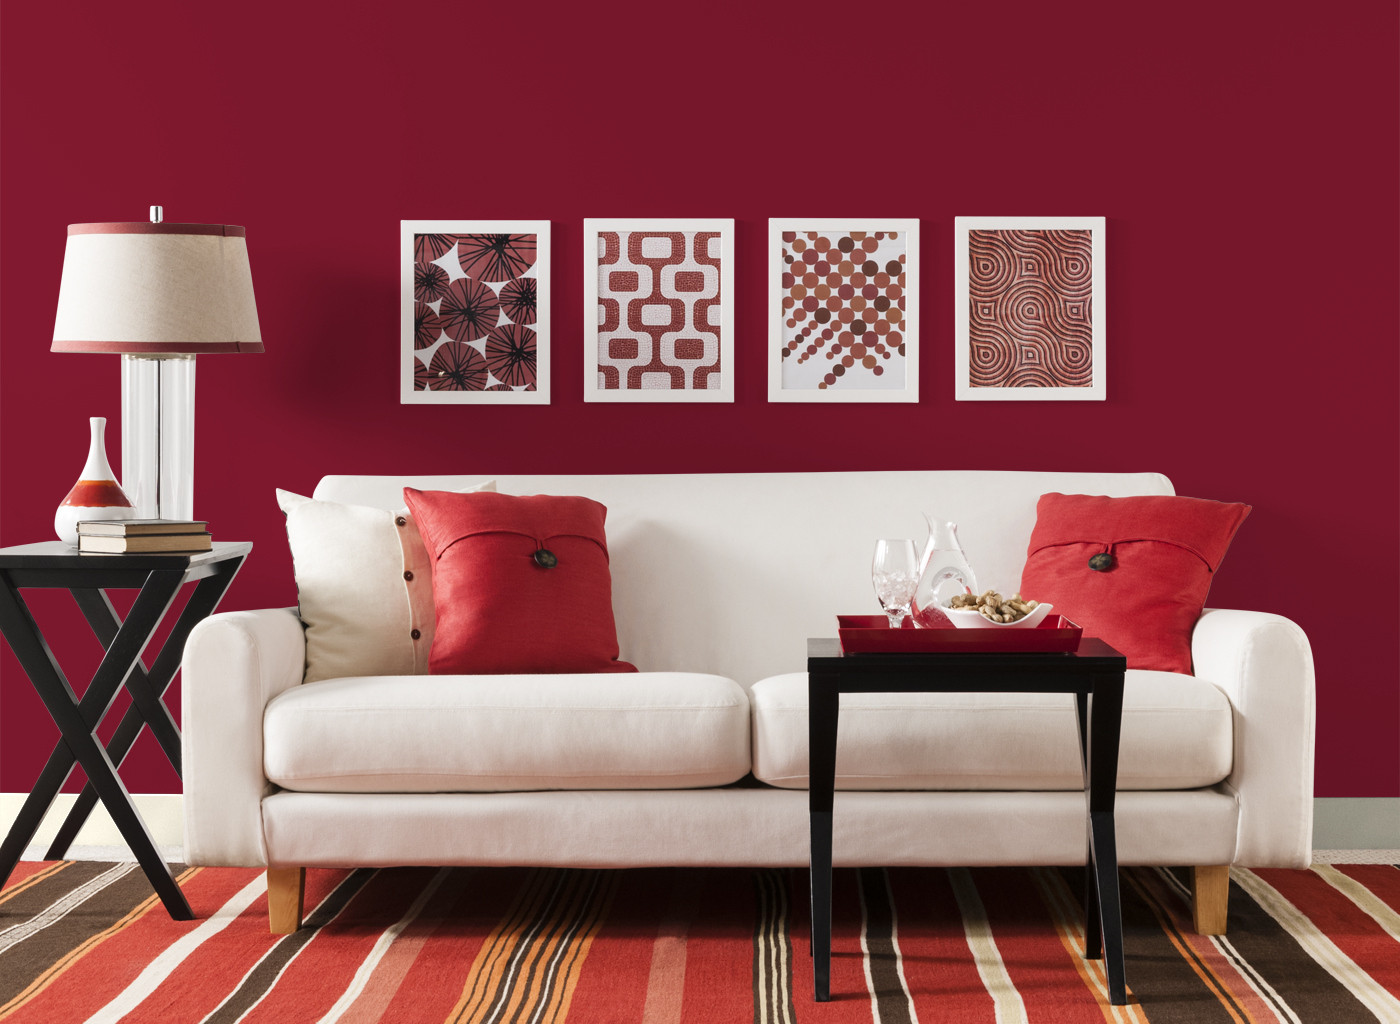 Living Room Color Paint
 Best Paint Color for Living Room Ideas to Decorate Living